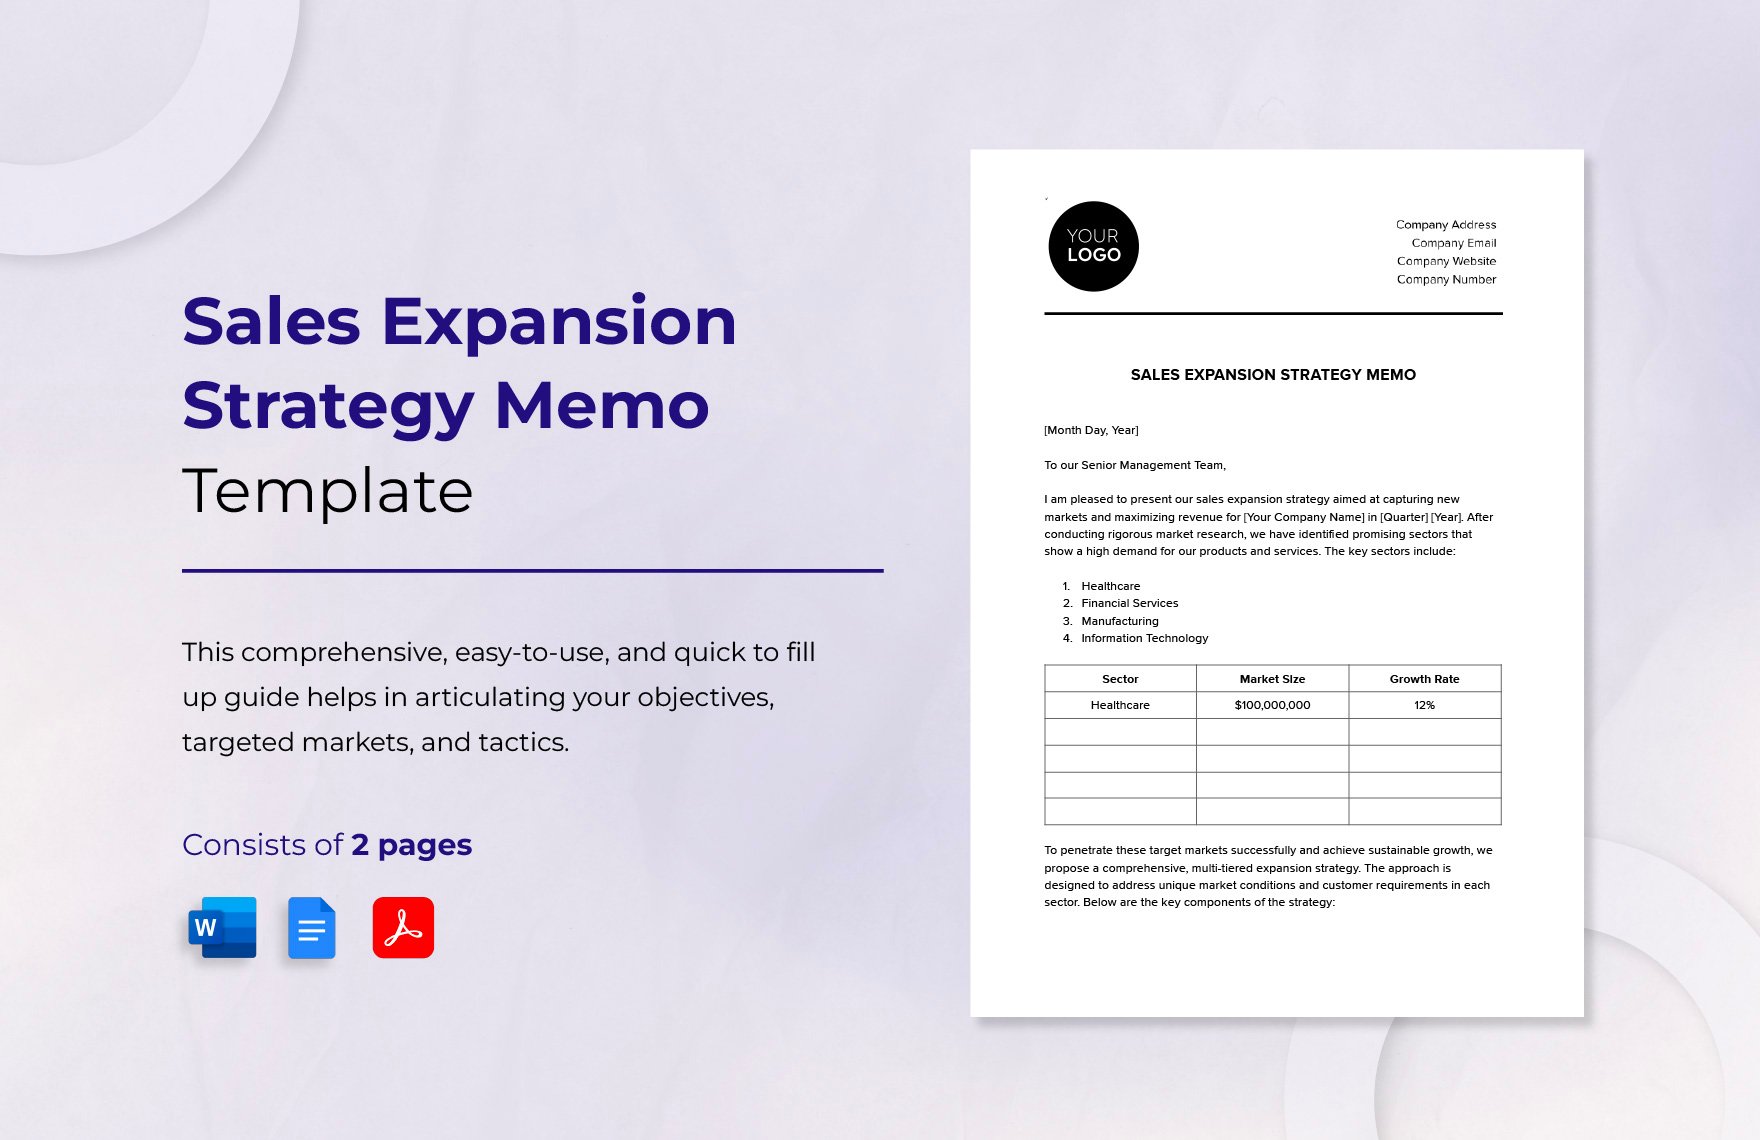 Sales Expansion Strategy Memo Template